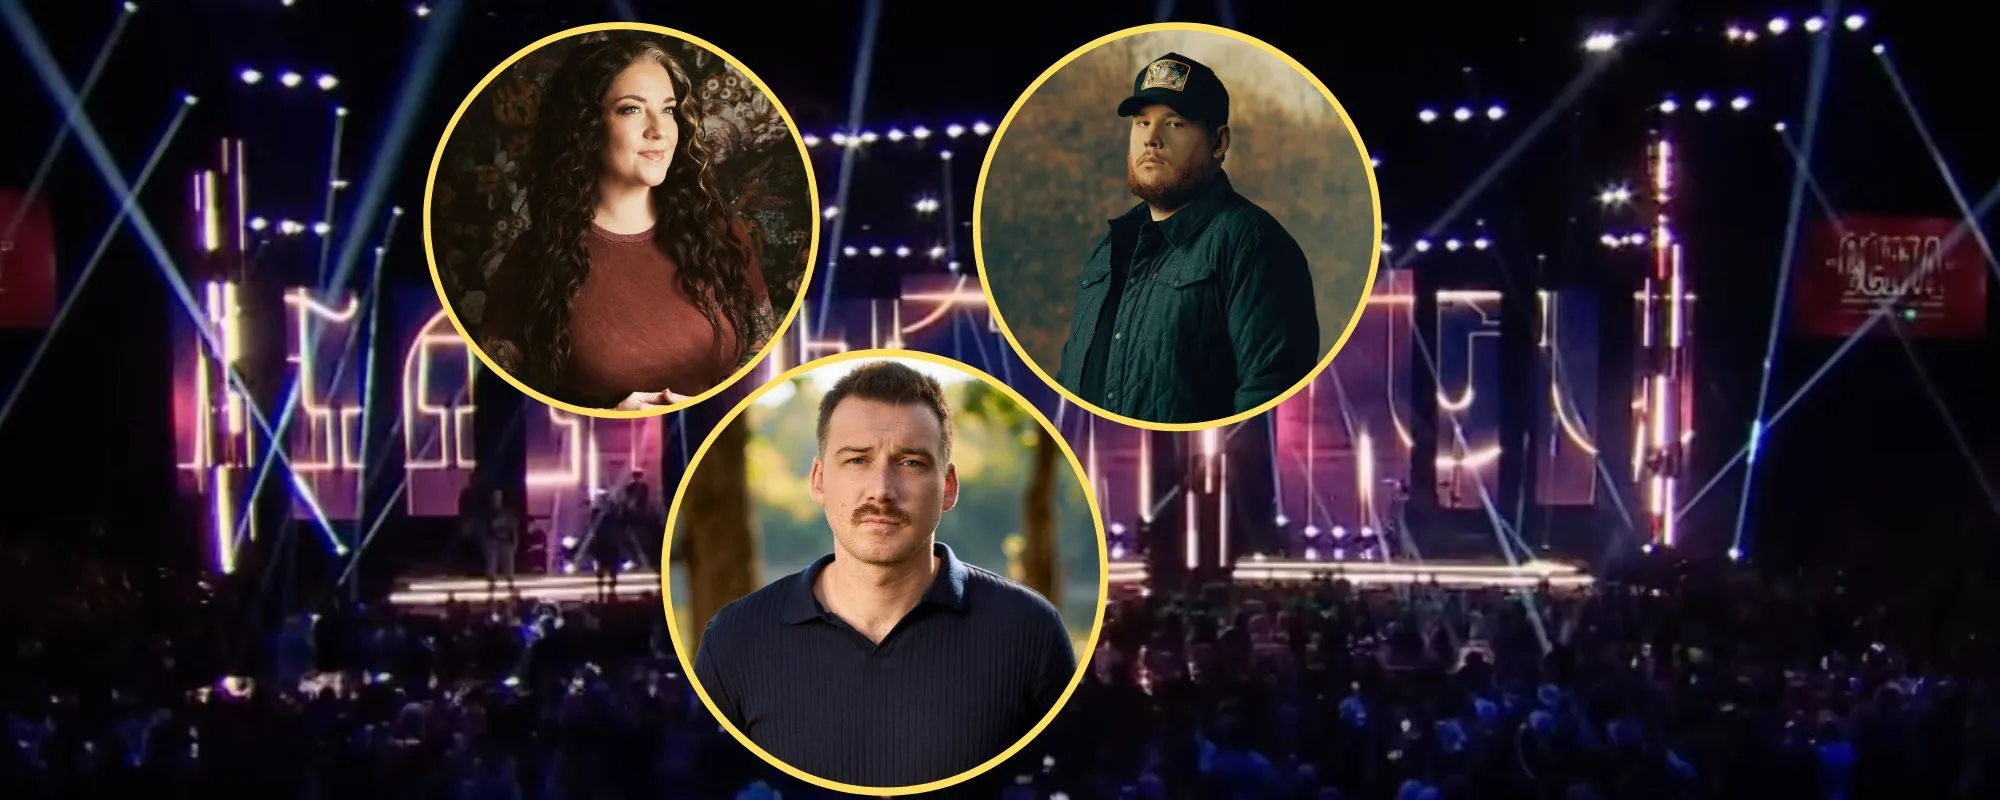 Luke Combs, Morgan Wallen, Ashley McBryde, Post Malone, and More Added to 2023 CMA Awards Performance Lineup